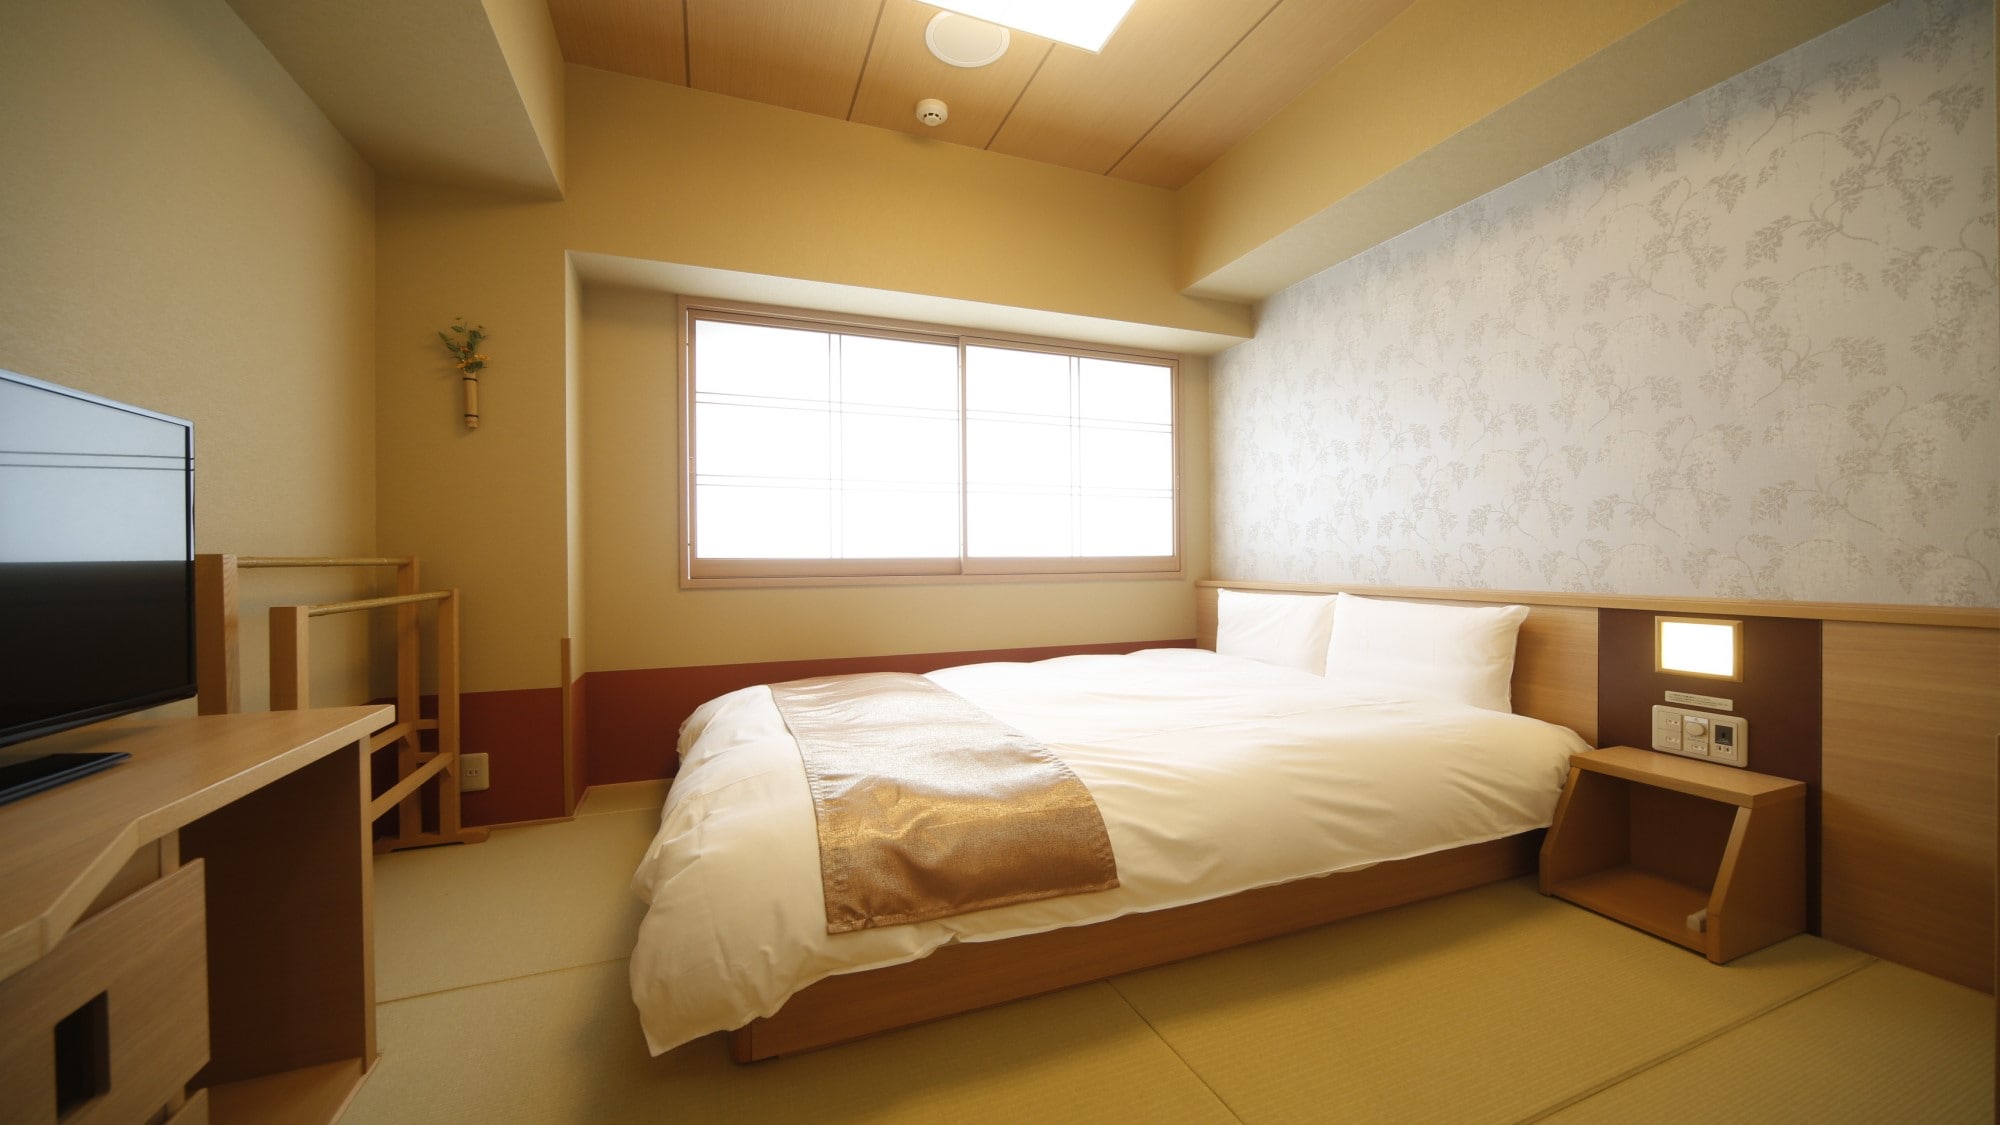 Double room [No smoking] (140 & times; 195 cm) Approximately 15 square meters ◆ Serta bed equipped ◆